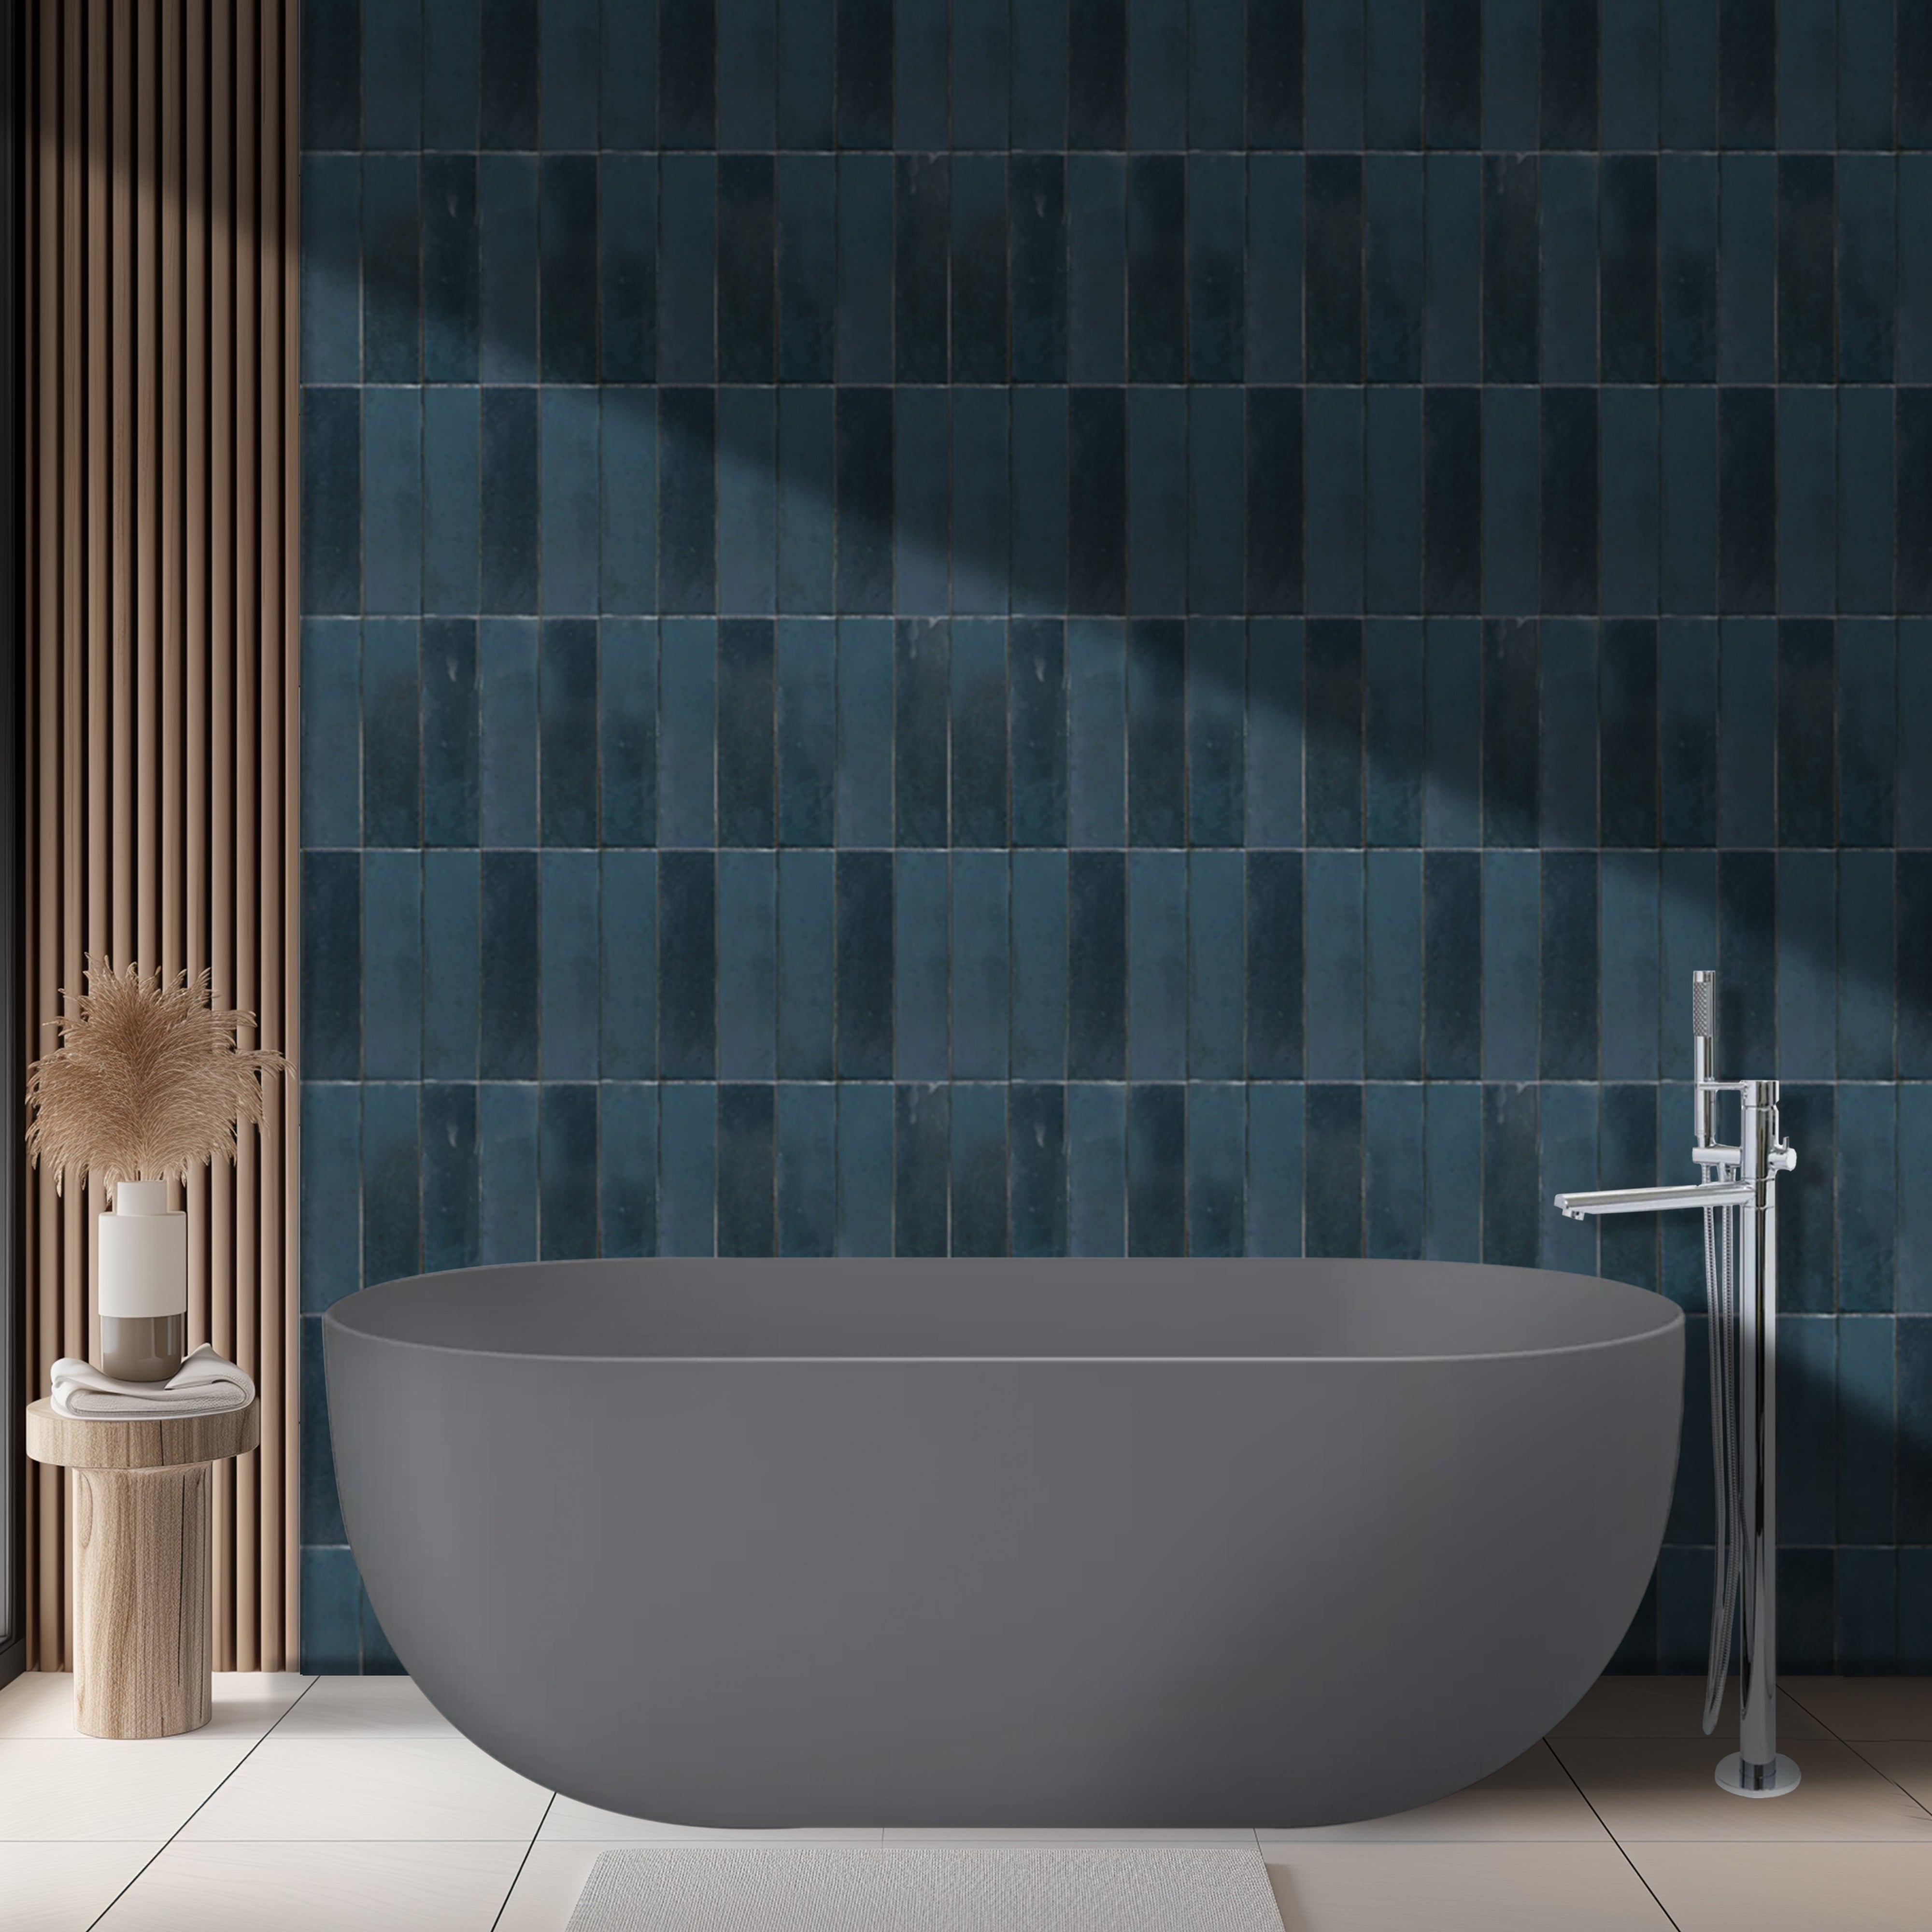 LINSOL NORA FREESTANDING BATHTUB GREY BLUE (AVAILABLE IN 1500MM AND 1700MM)